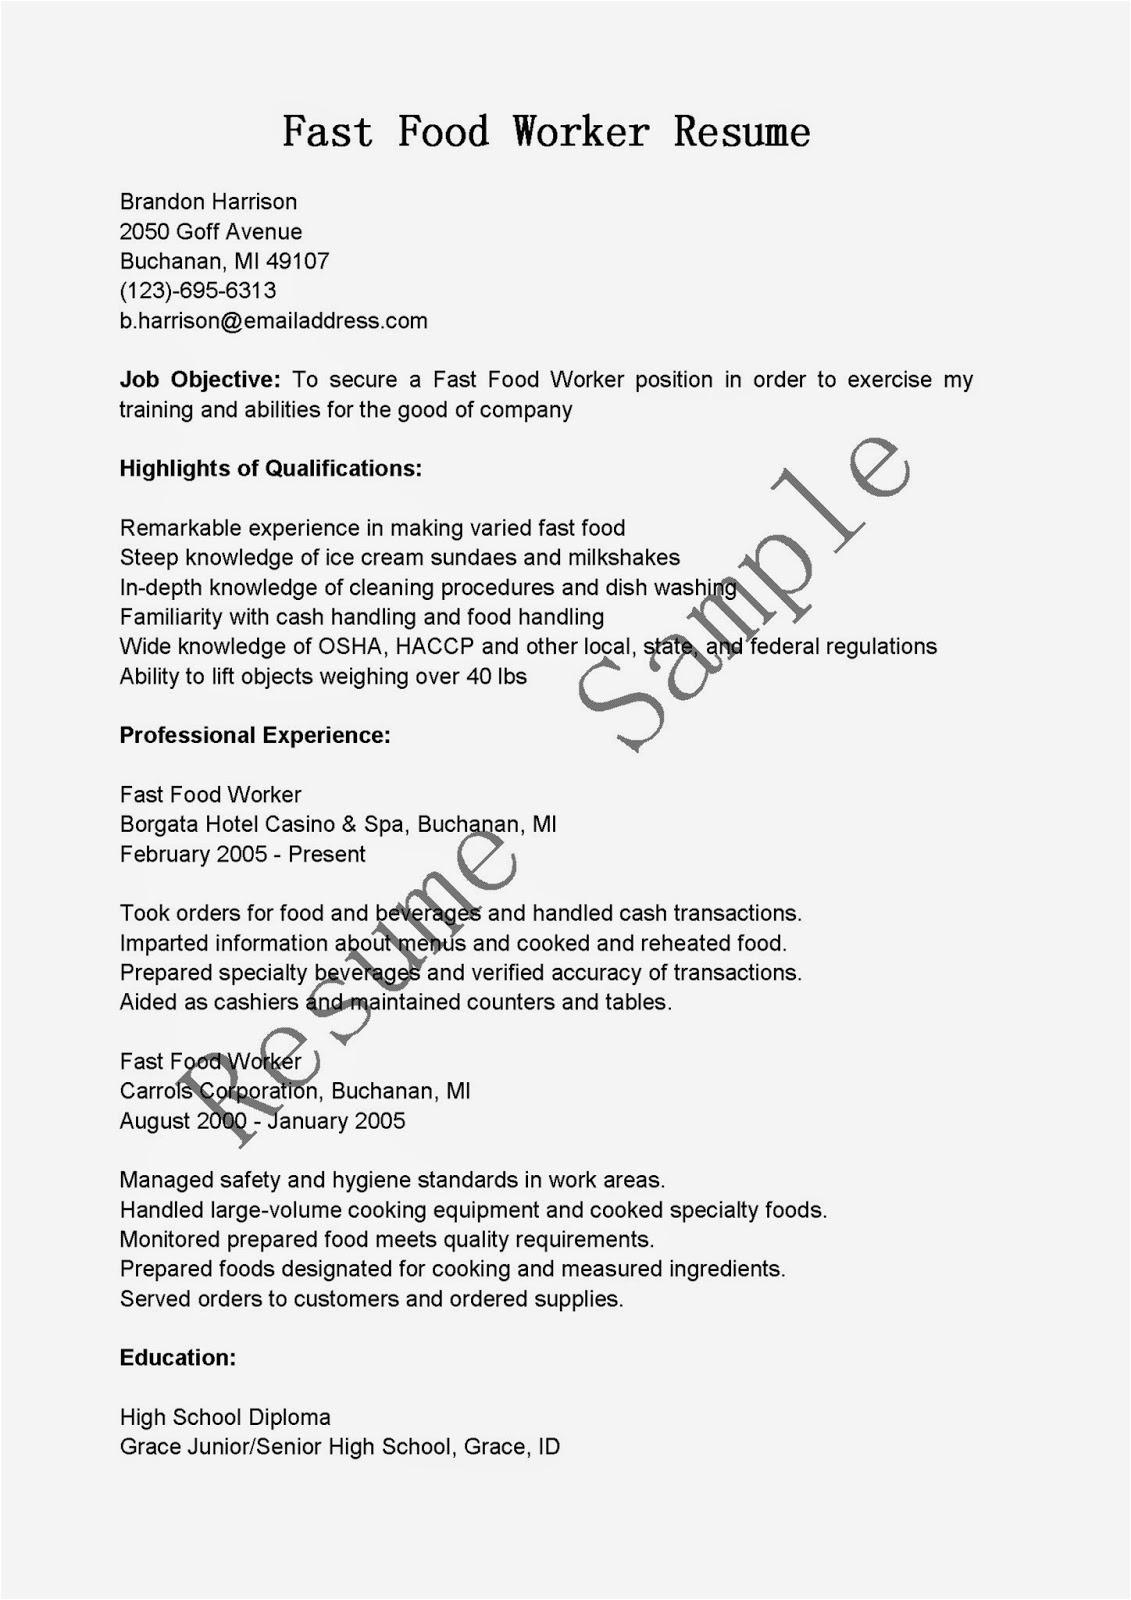 Resume Templates for Fast Food Worker Resume Samples Fast Food Worker Resume Sample